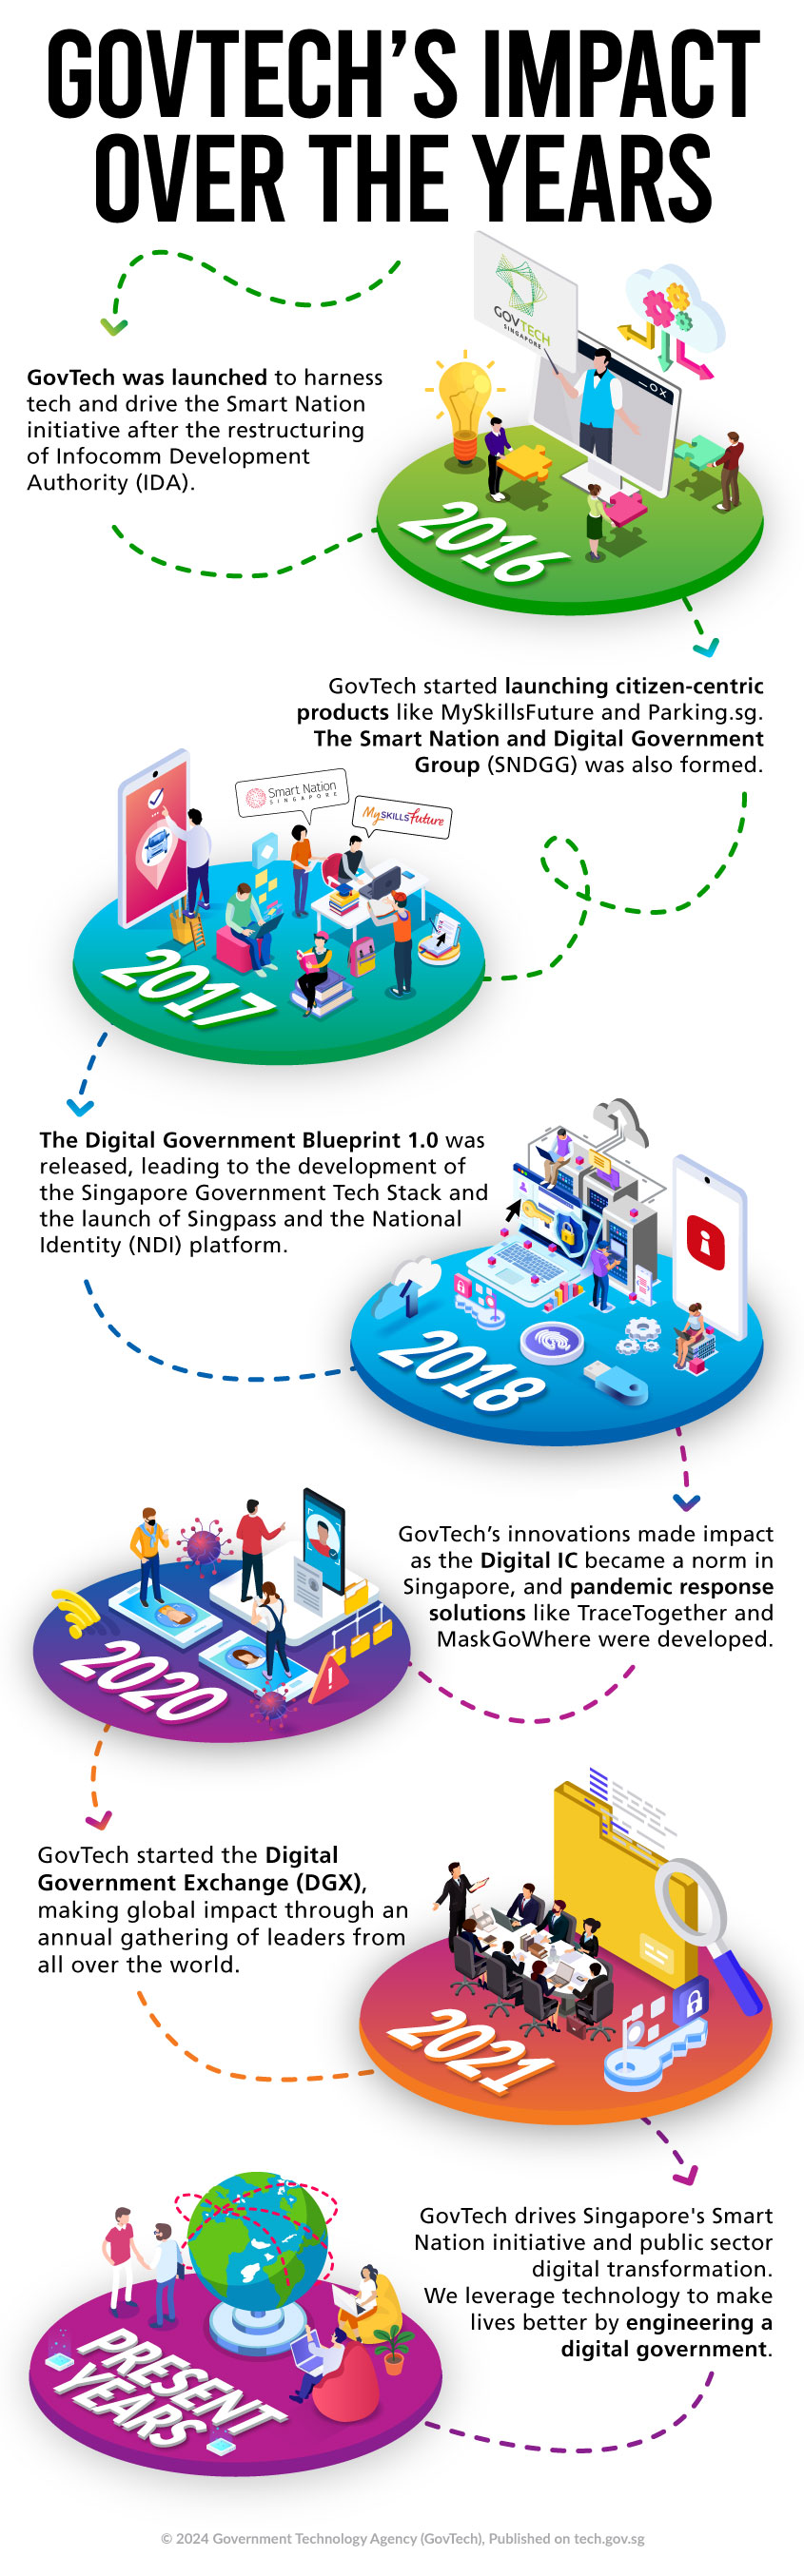 GovTech history and Singapore digital government journey